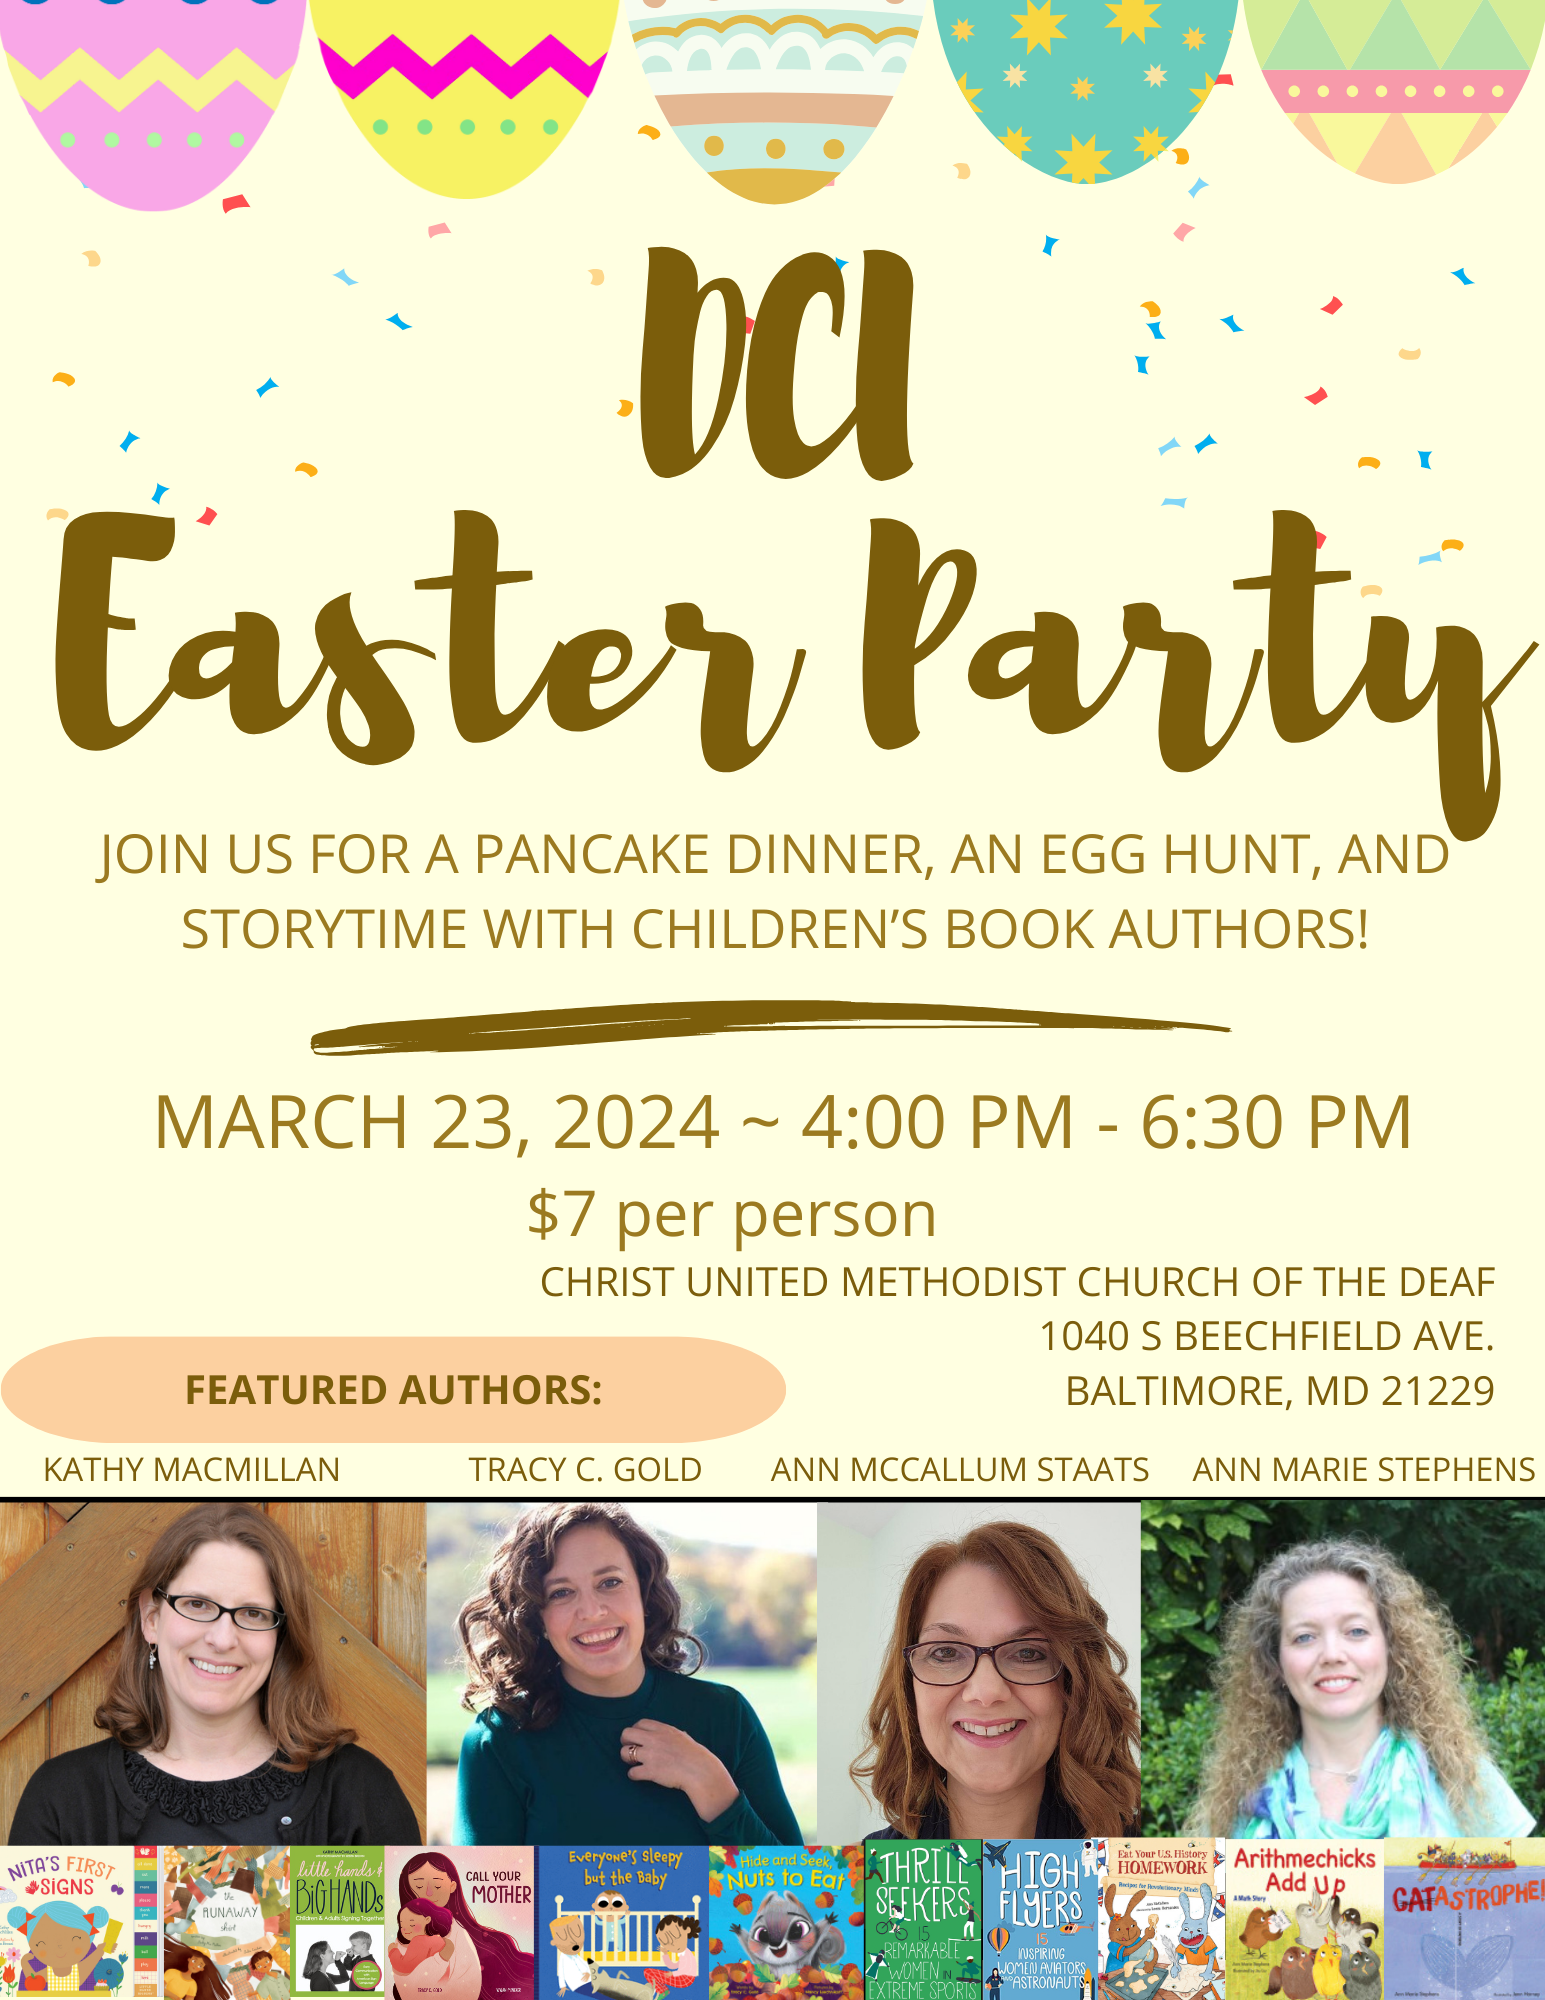 DCI Easter Party. Join us for a pancake supper, egg hunt, and storytime with children's book authors. March 24, 2024, 4-6:30 PM. $7 per person. Christ United Methodist Church of the Deaf. 1040 S Beechfield Ave, Catonsville MD 21229. Featured authors: Kathy MacMillan, Tracy C. Gold, Ann McCallum Staats, Ann Marie Stephens. 